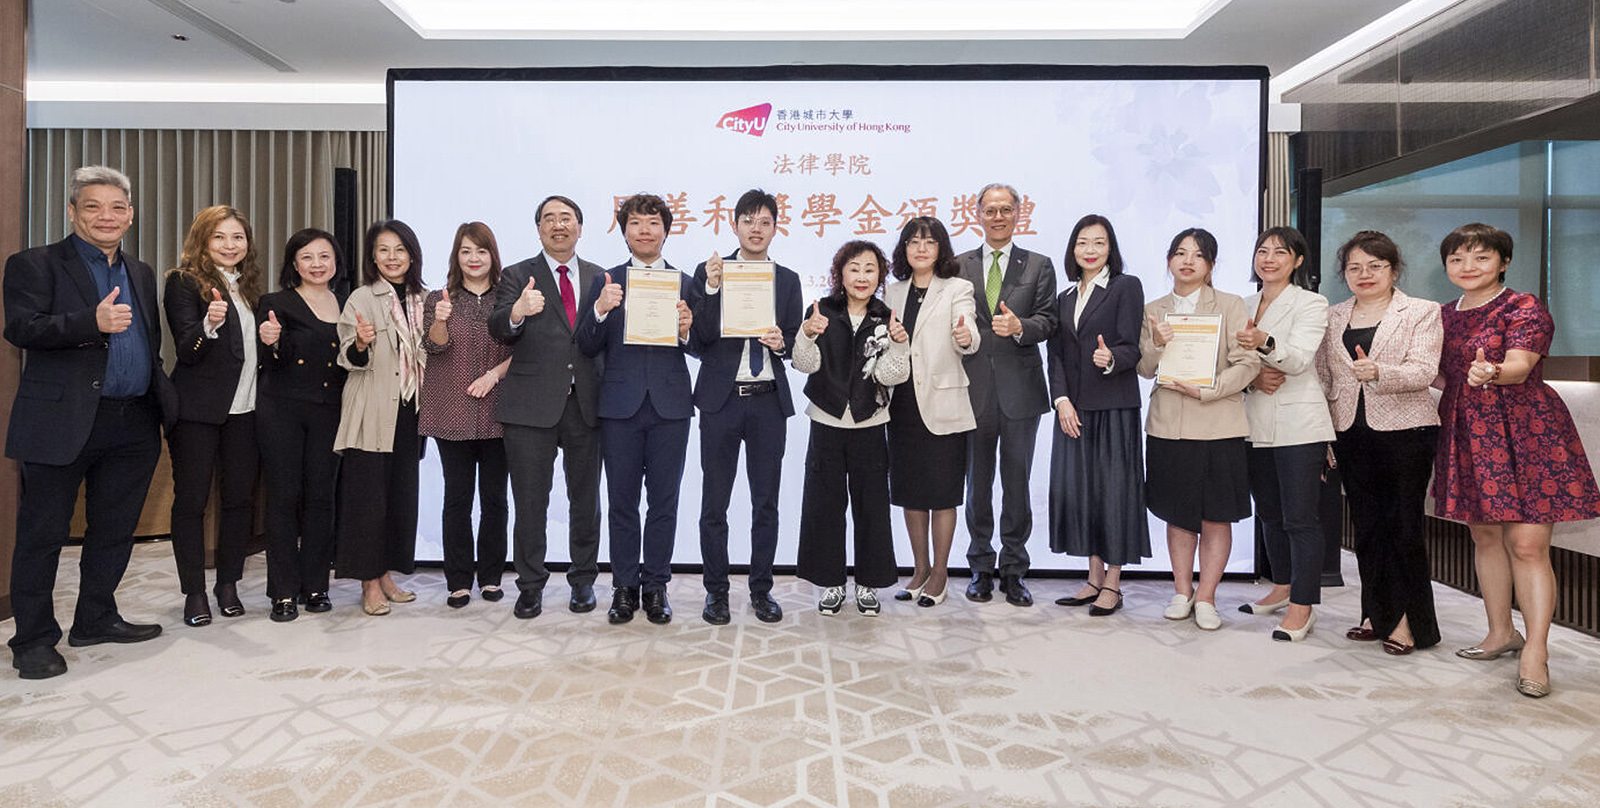 Ms Chau Sin Wo (8th from right), accompanied by Professor Lee Chun-sing (6th from left), CityUHK representatives and guests, attends the first award ceremony for the CityUHK Chau Sin Wo Scholarships for the School of Law.